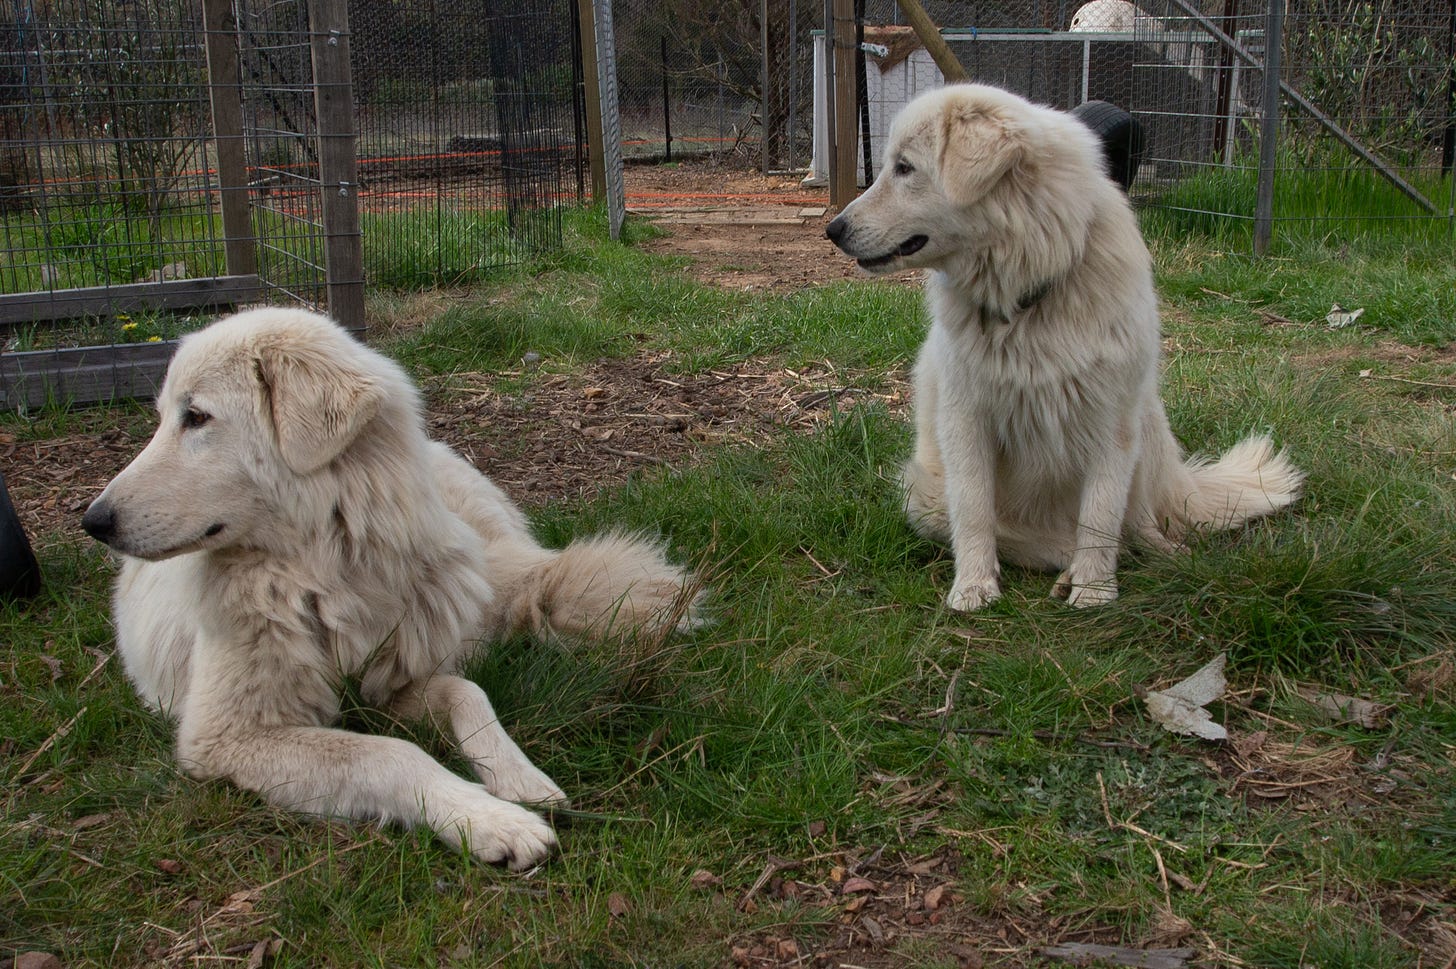 Two white dogs are sitting on green grass, rural fencing in the background. One is lying down and head up, the other sitting up. Both are looking intently at something to the left, off-camera.